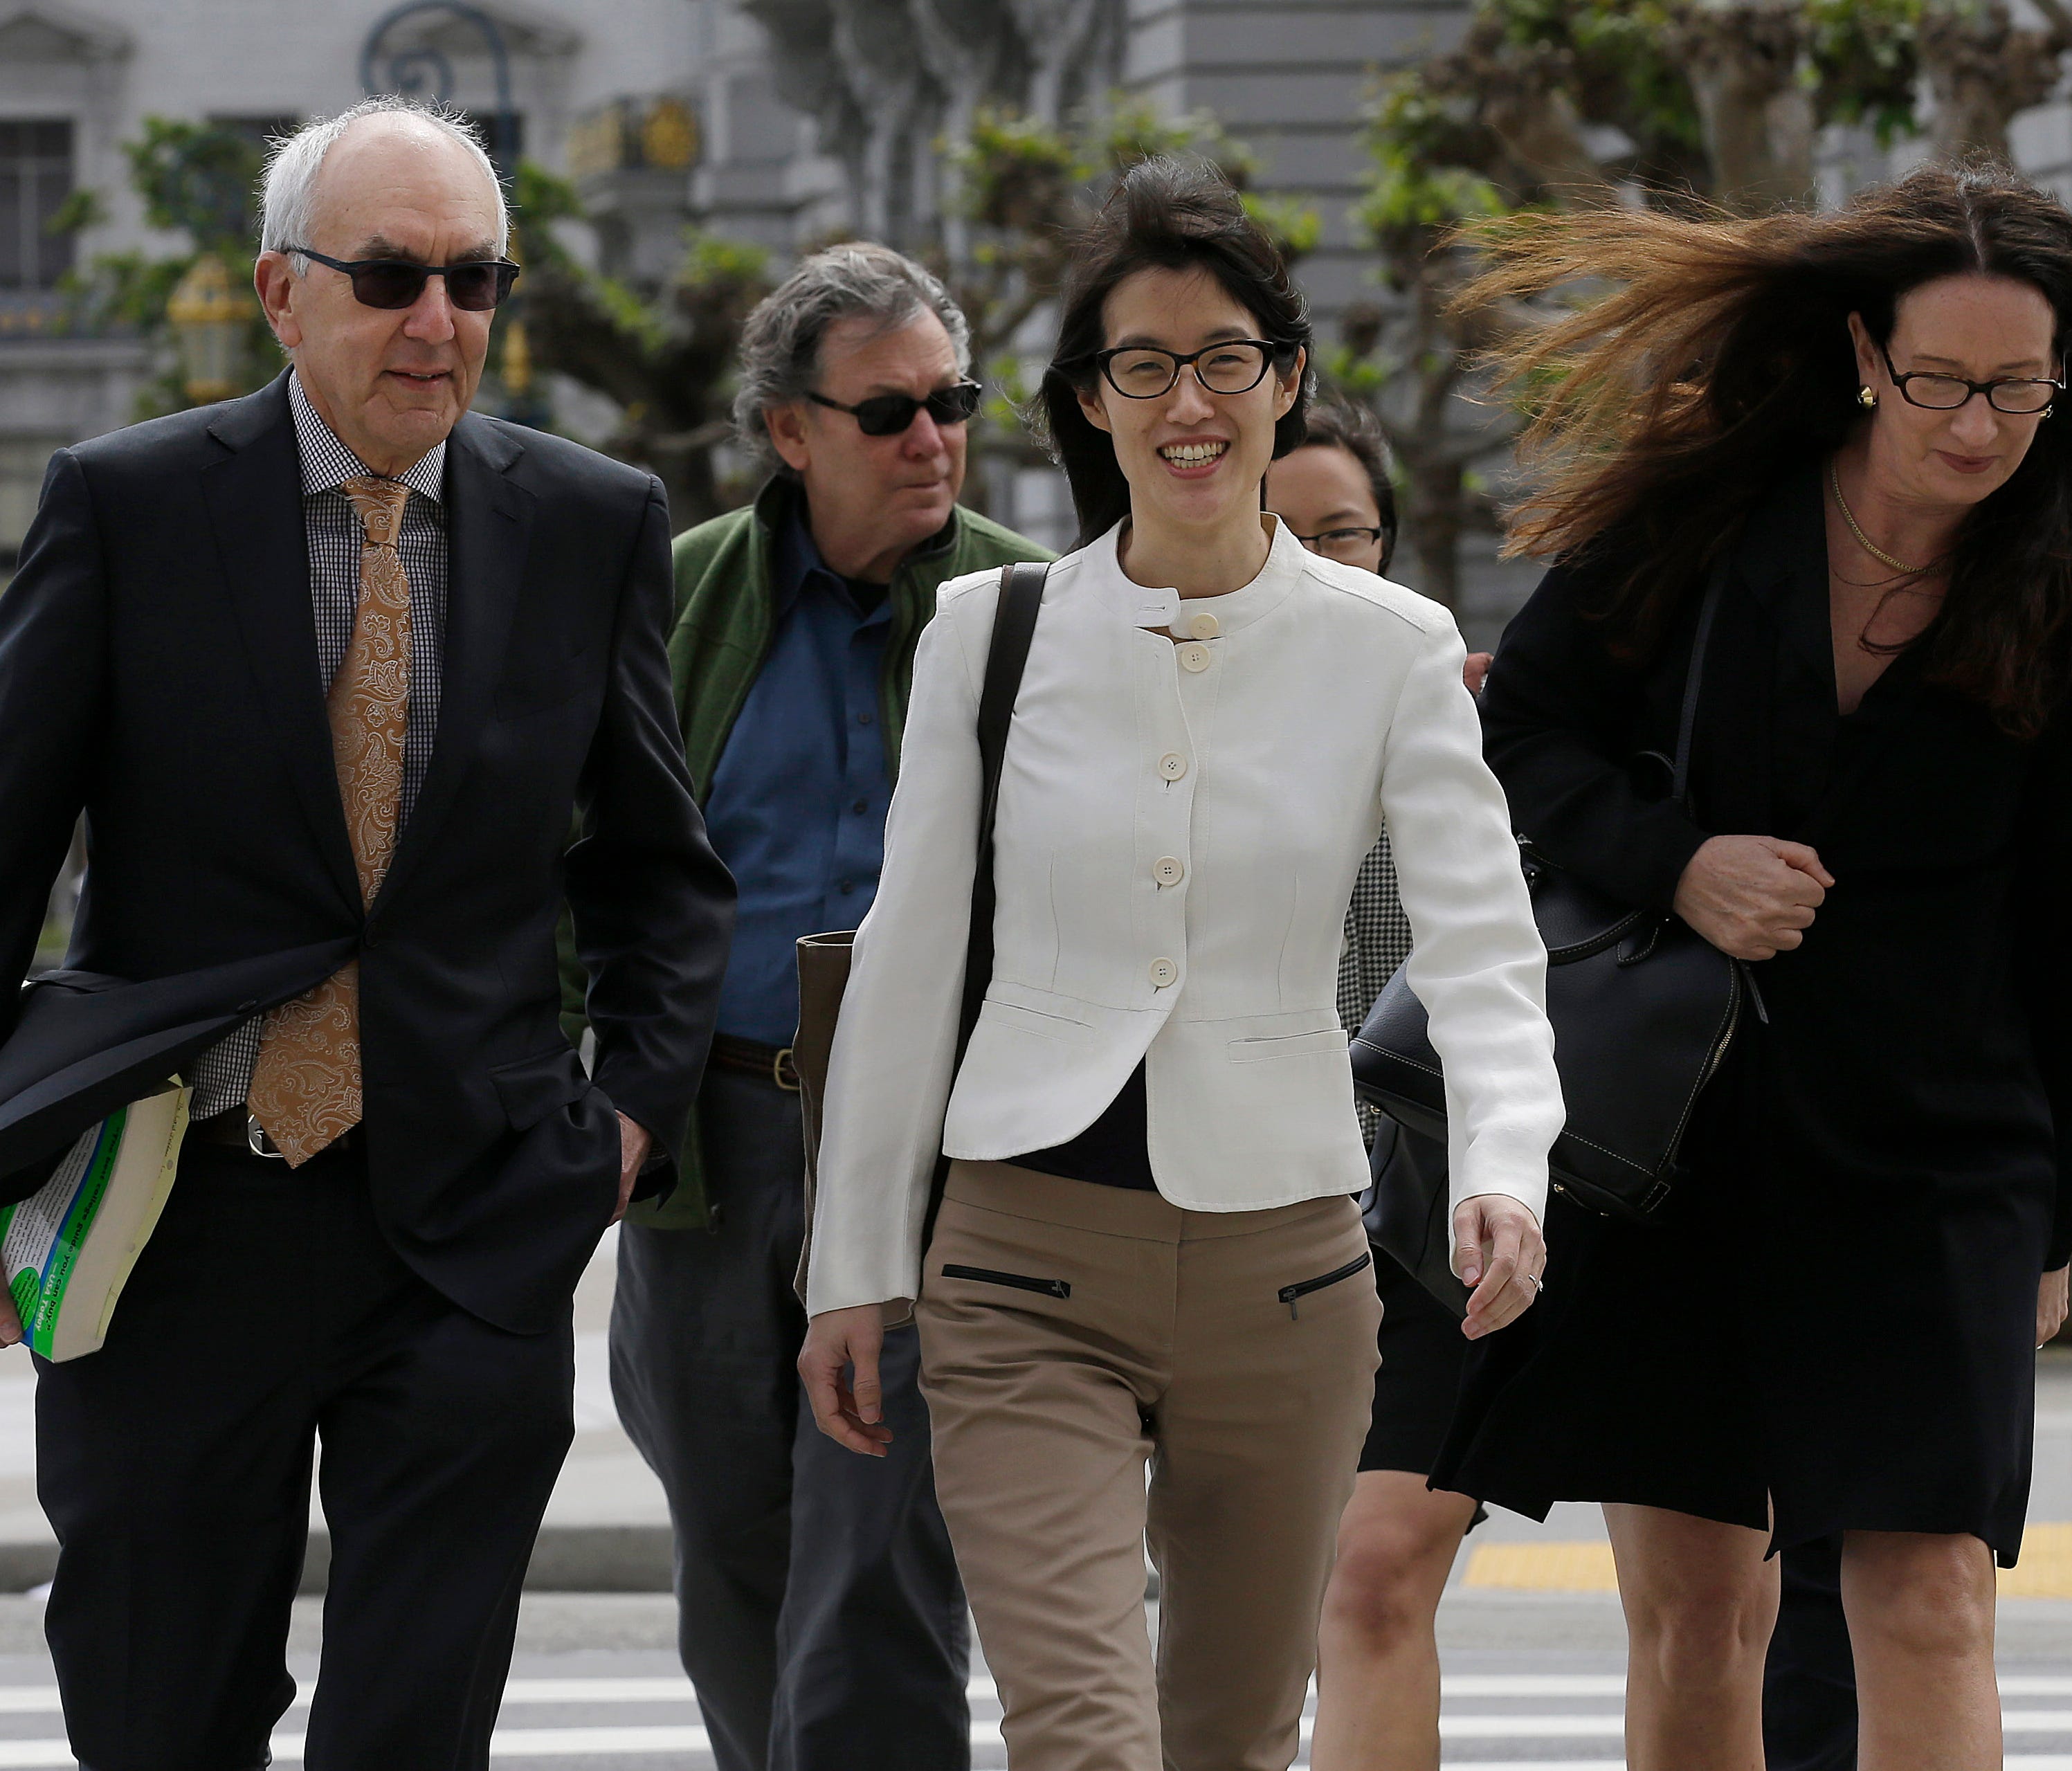 Ellen Pao, center, walks to Civic Center Courthouse in San Francisco March 27. A jury ruled against Ellen Pao in her sex discrimination case against venture capital firm Kleiner Perkins Caufield & Byers.